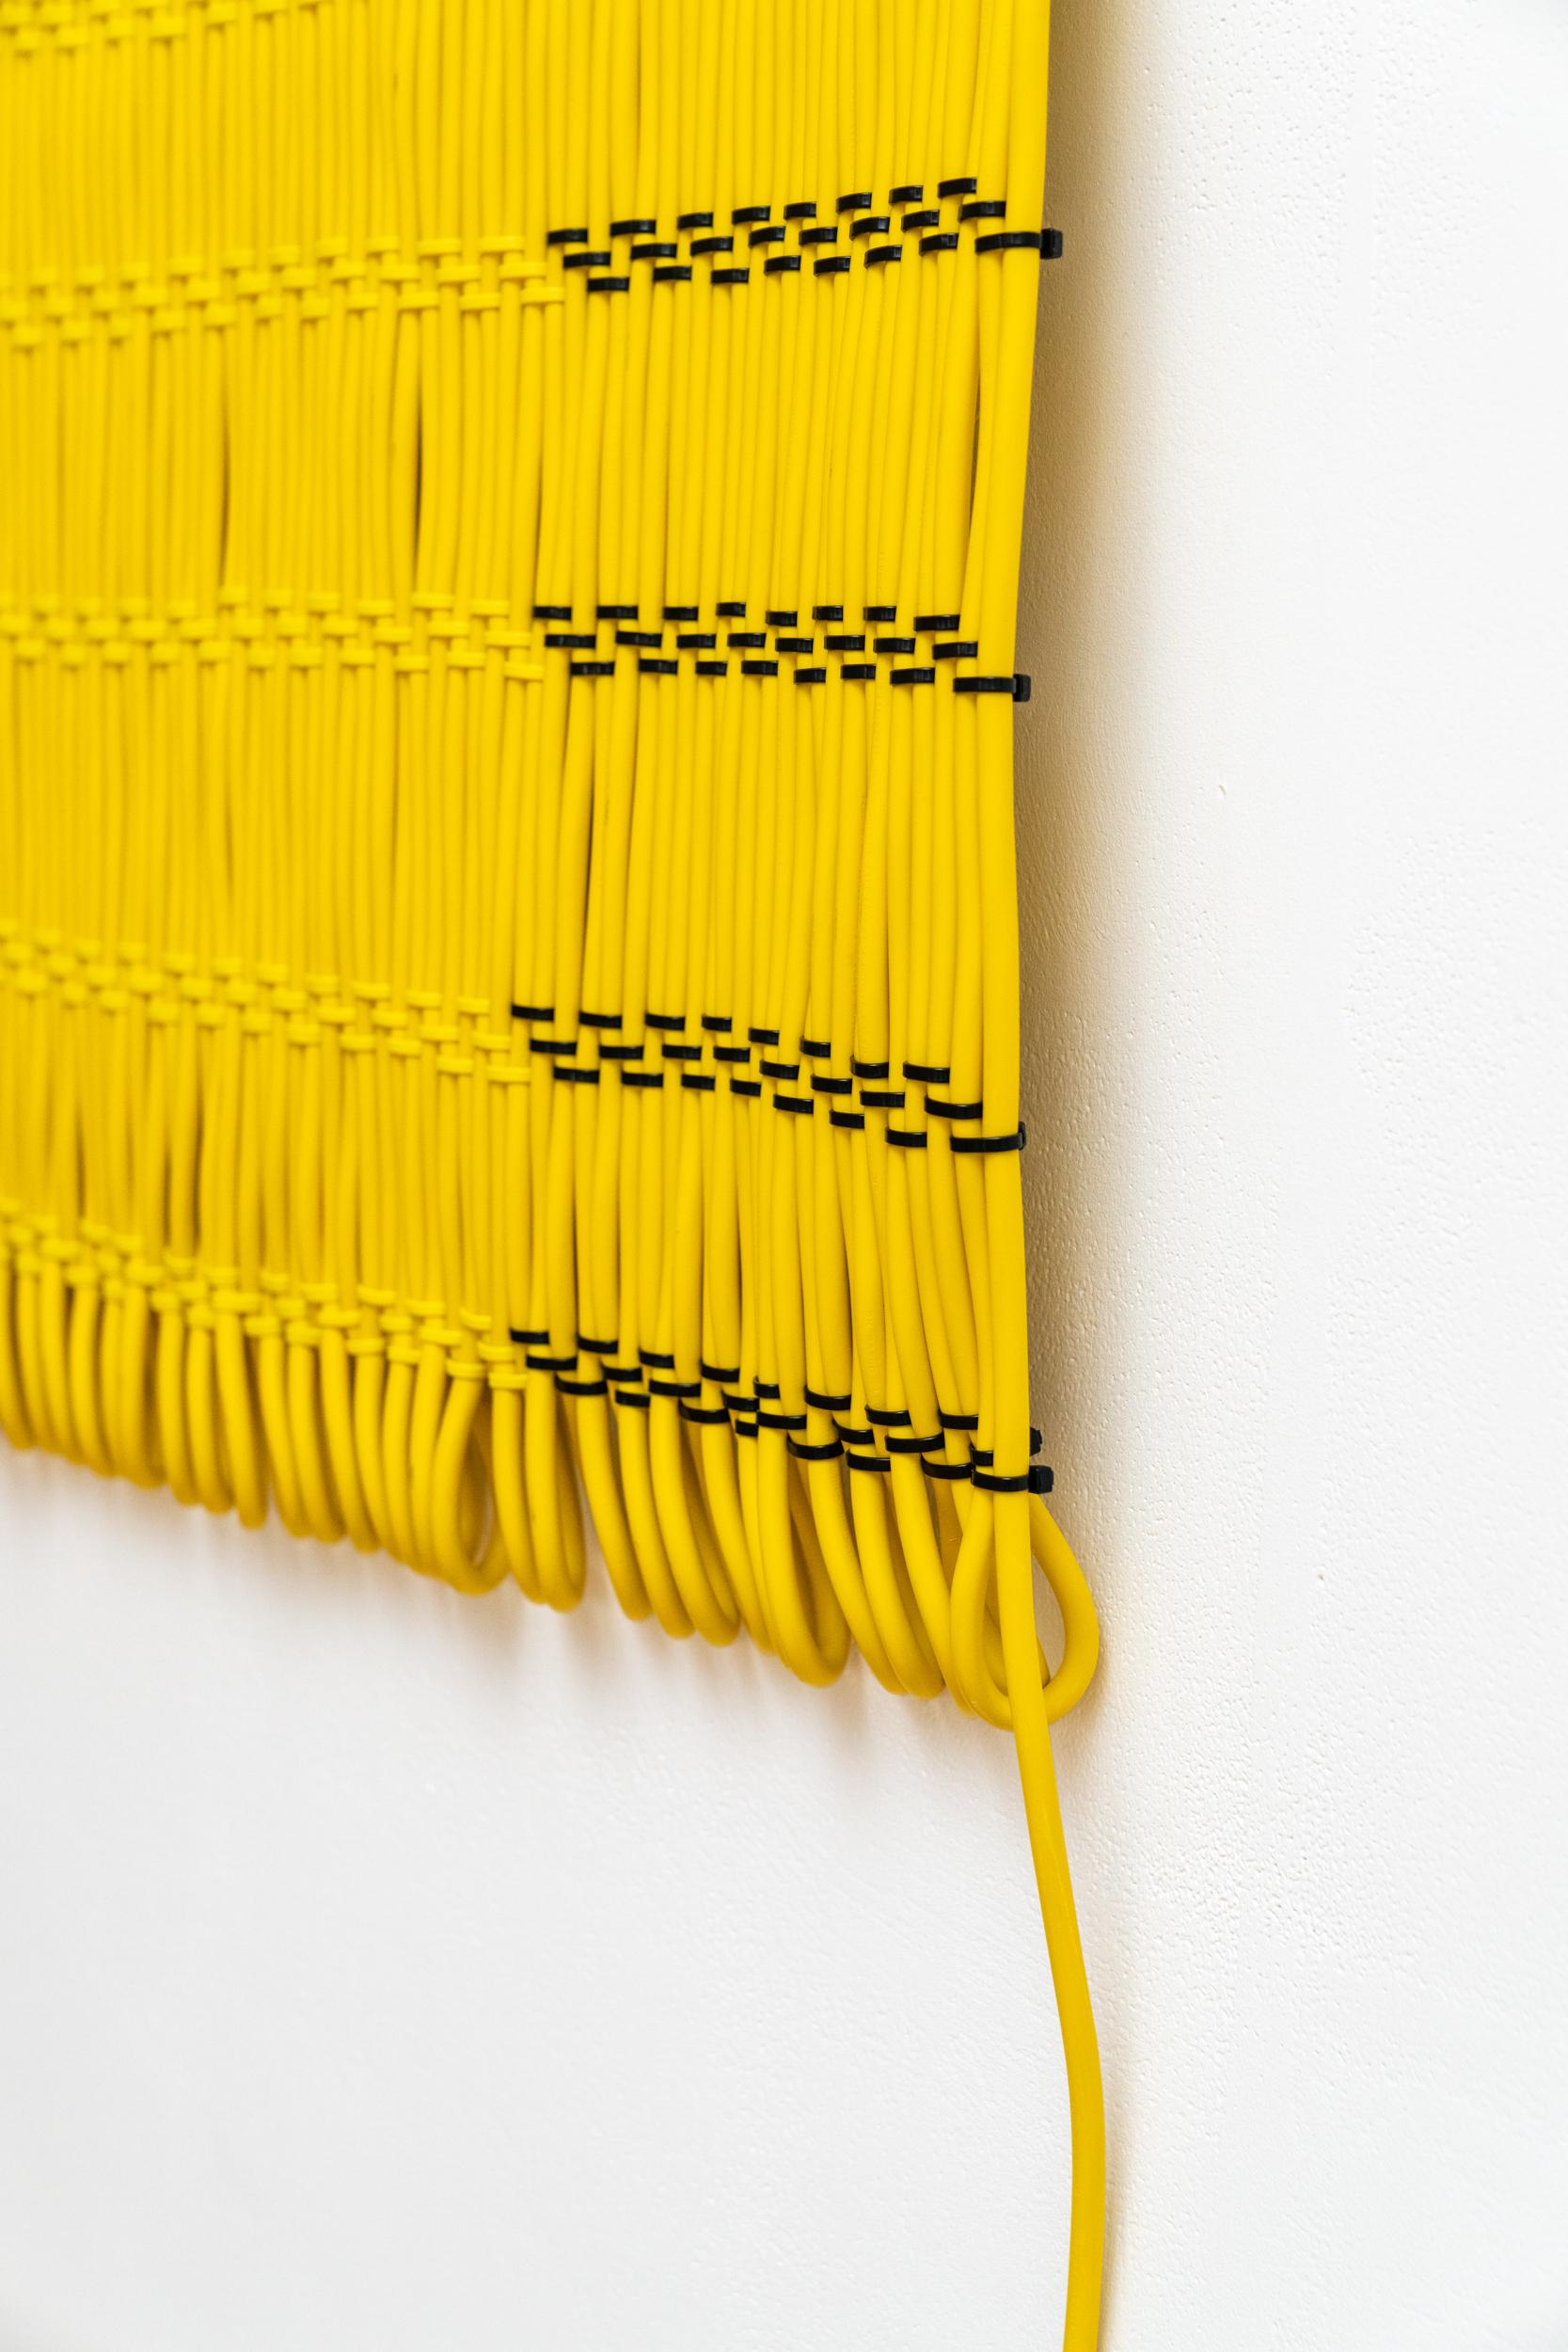 Post-Modern 100 Meter Cable Wall Rug by Tino Seubert For Sale